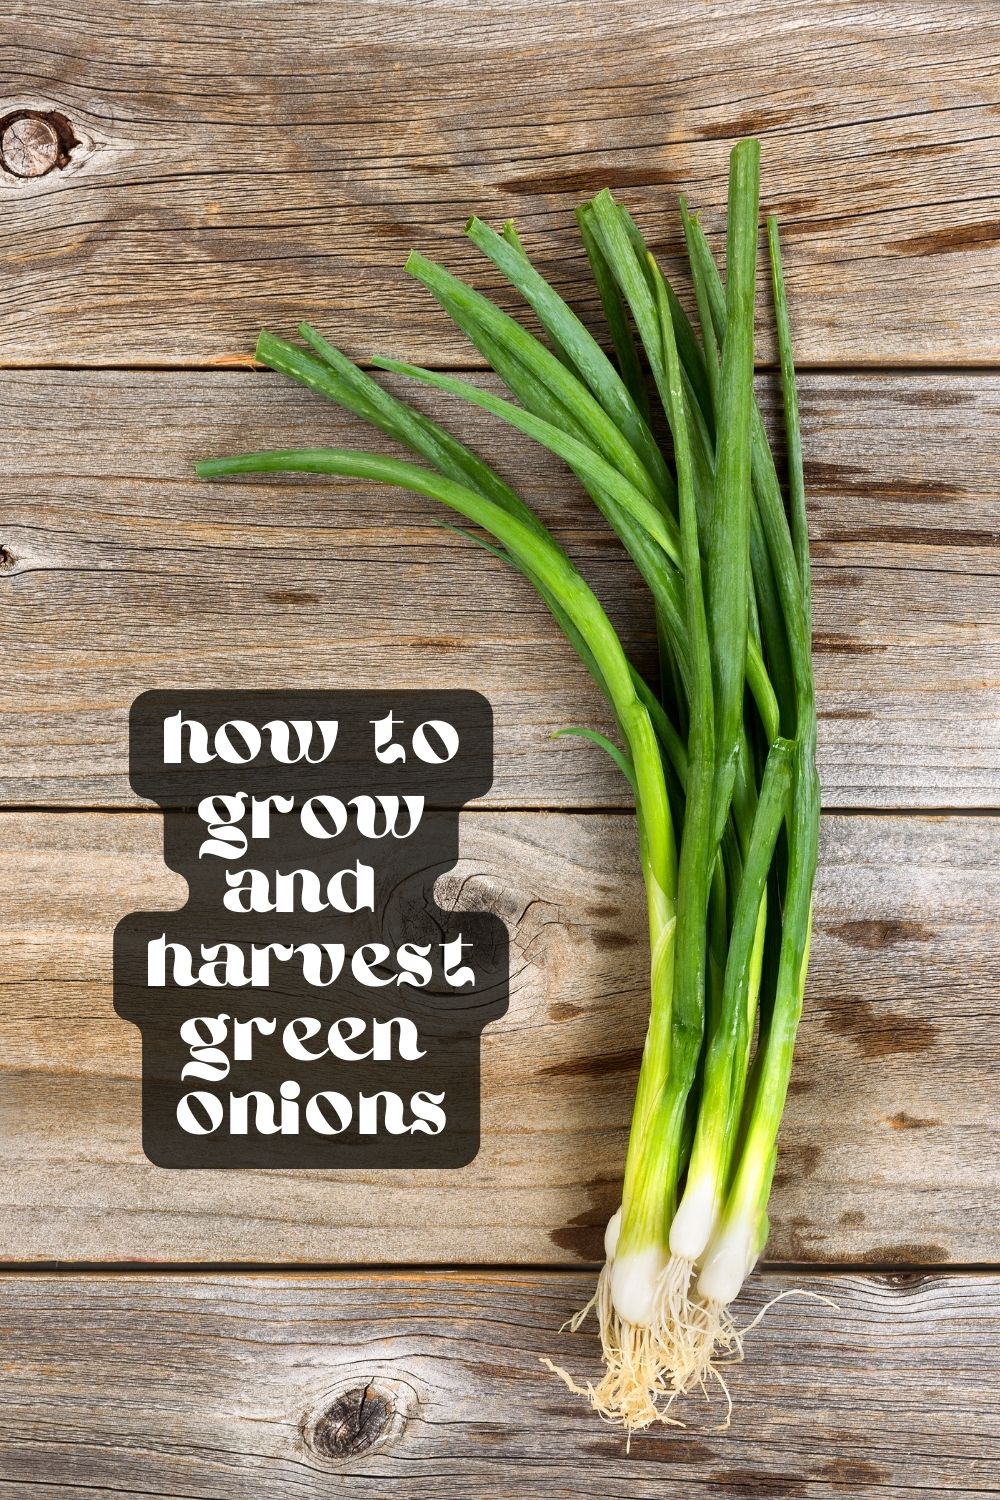 Green onions are one of the easiest vegetables to grow. They can be grown indoors in small pots or outdoors in a garden bed. You can even regrow them from scraps! If you want to add some freshness to your meals without going to the grocery store, growing green onions at home is a great option. 